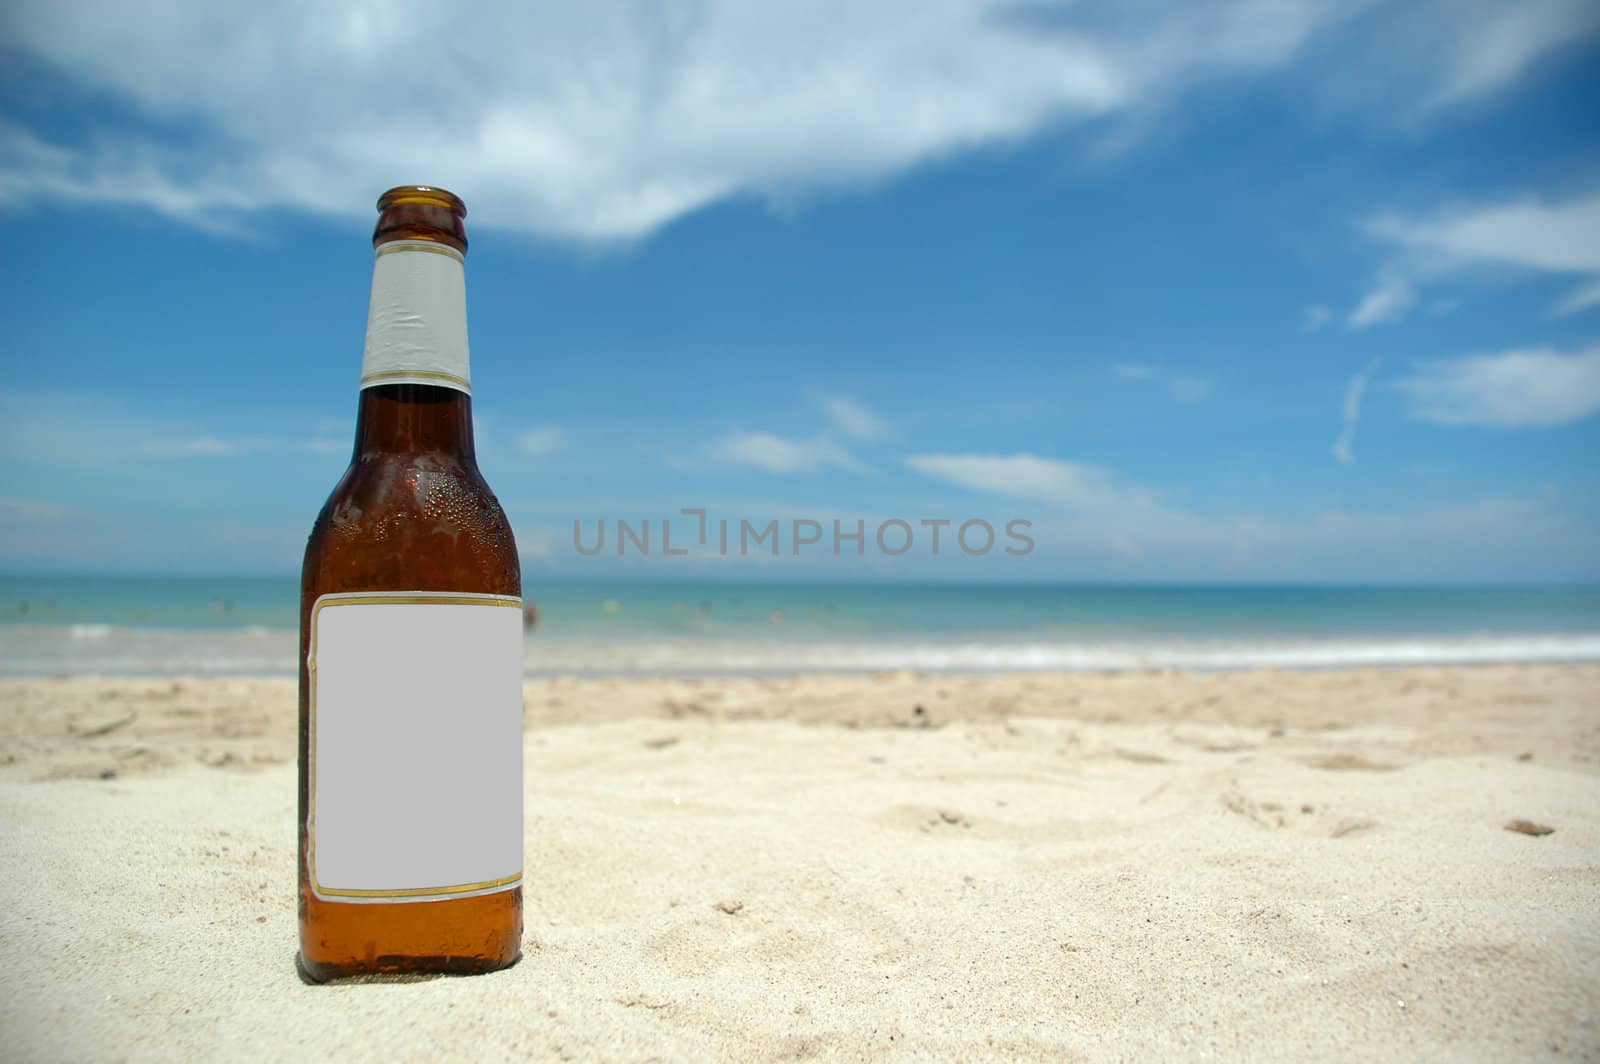 Beer and beach (blank)insert your own logo or tekst on the beer lable.